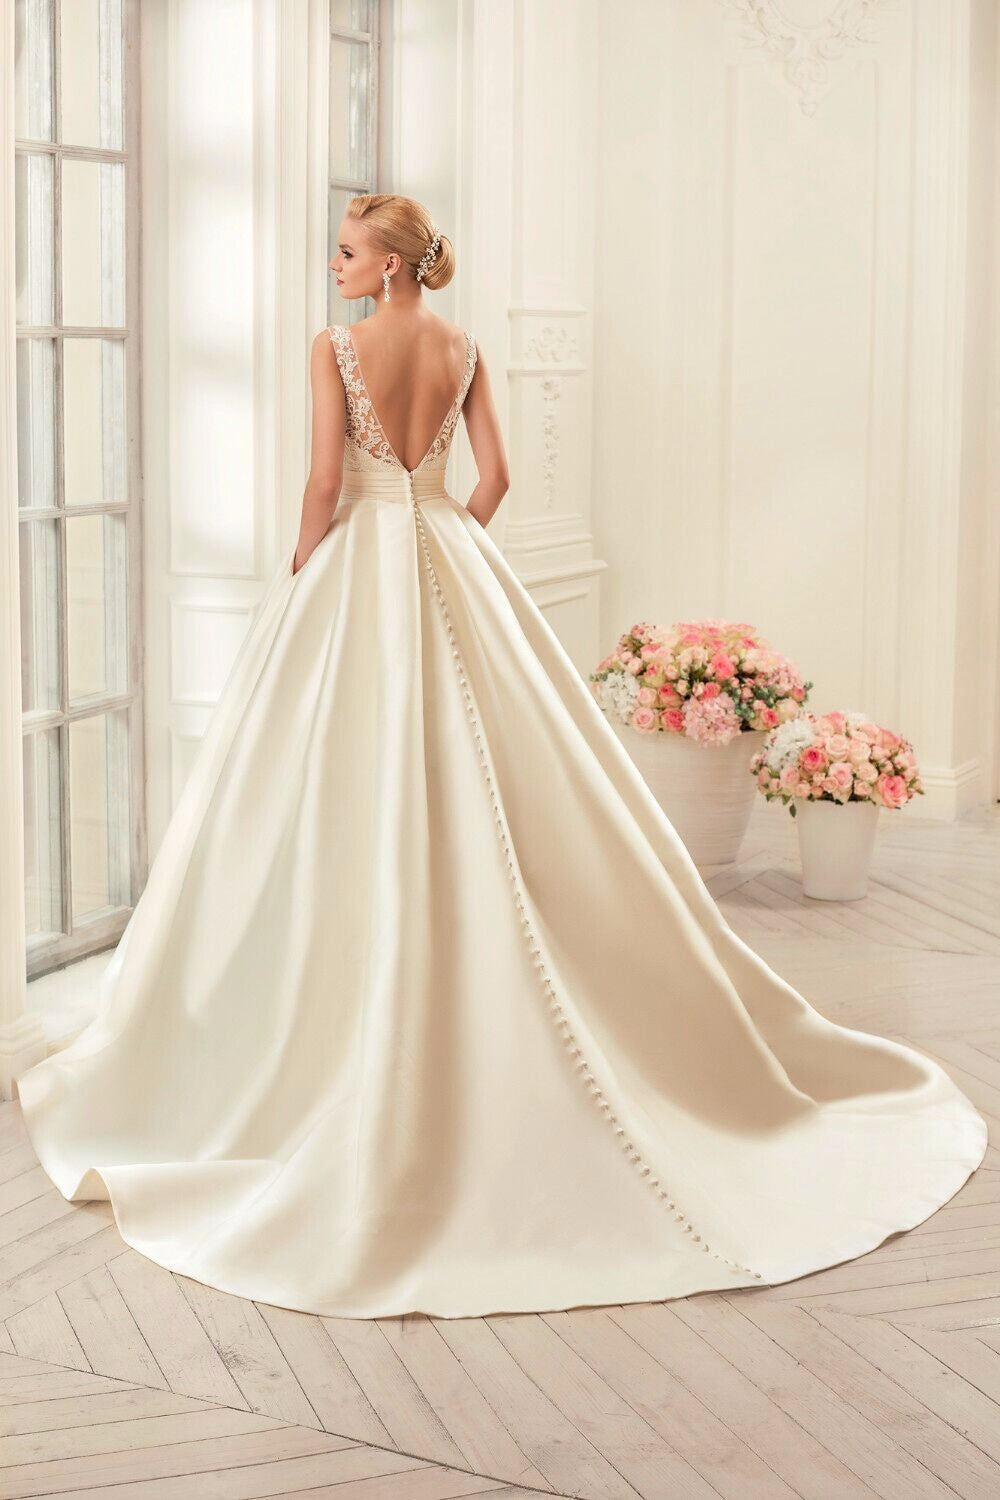 Satin Wedding Dresses Ball Gown real photo white & Ivory elegant Bridal Dress Open Back Wedding Dresses - TRIPLE AAA Fashion Collection